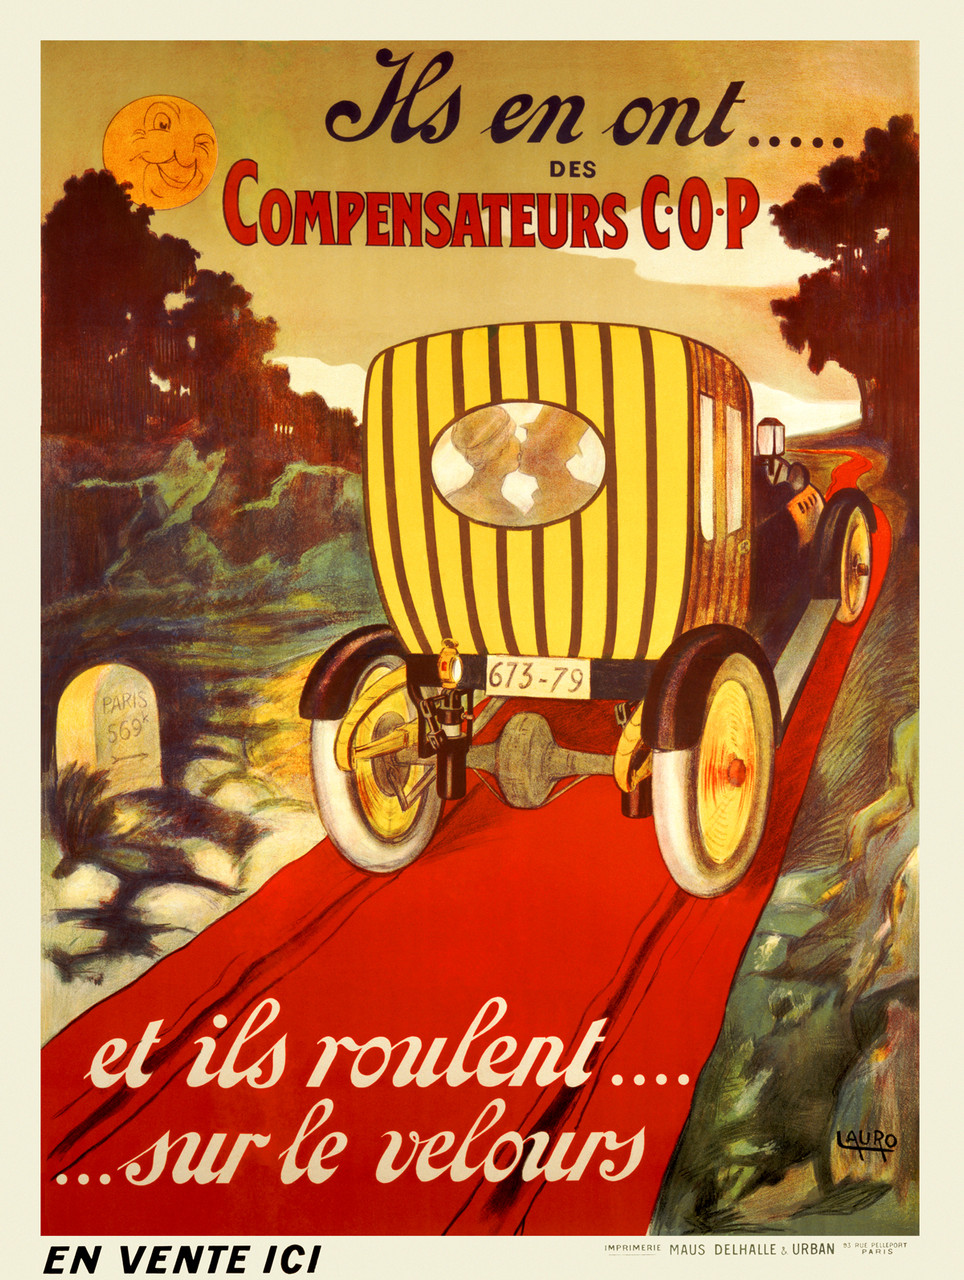 ompensateurs COP by M. Lauro 1918 France - Vintage Poster Reproduction. French transportation poster features a car driving away with a couple kissing on a red road of velvet through the woods. Giclee Advertising Prints. Classic Posters